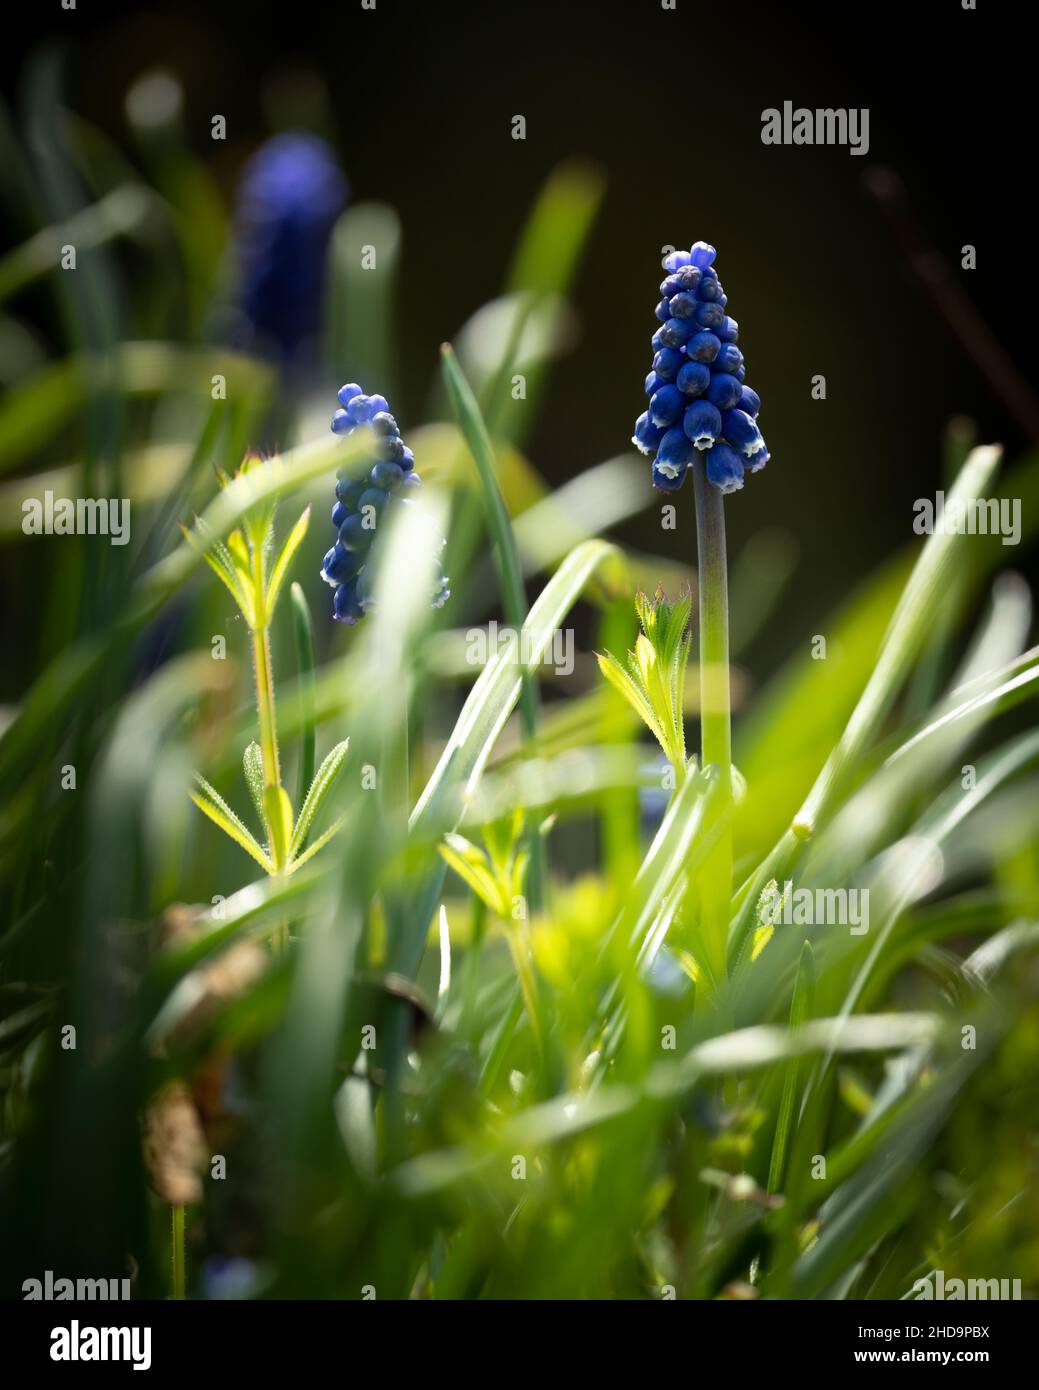 Grape Hyacinth flowers with green stems Stock Photo